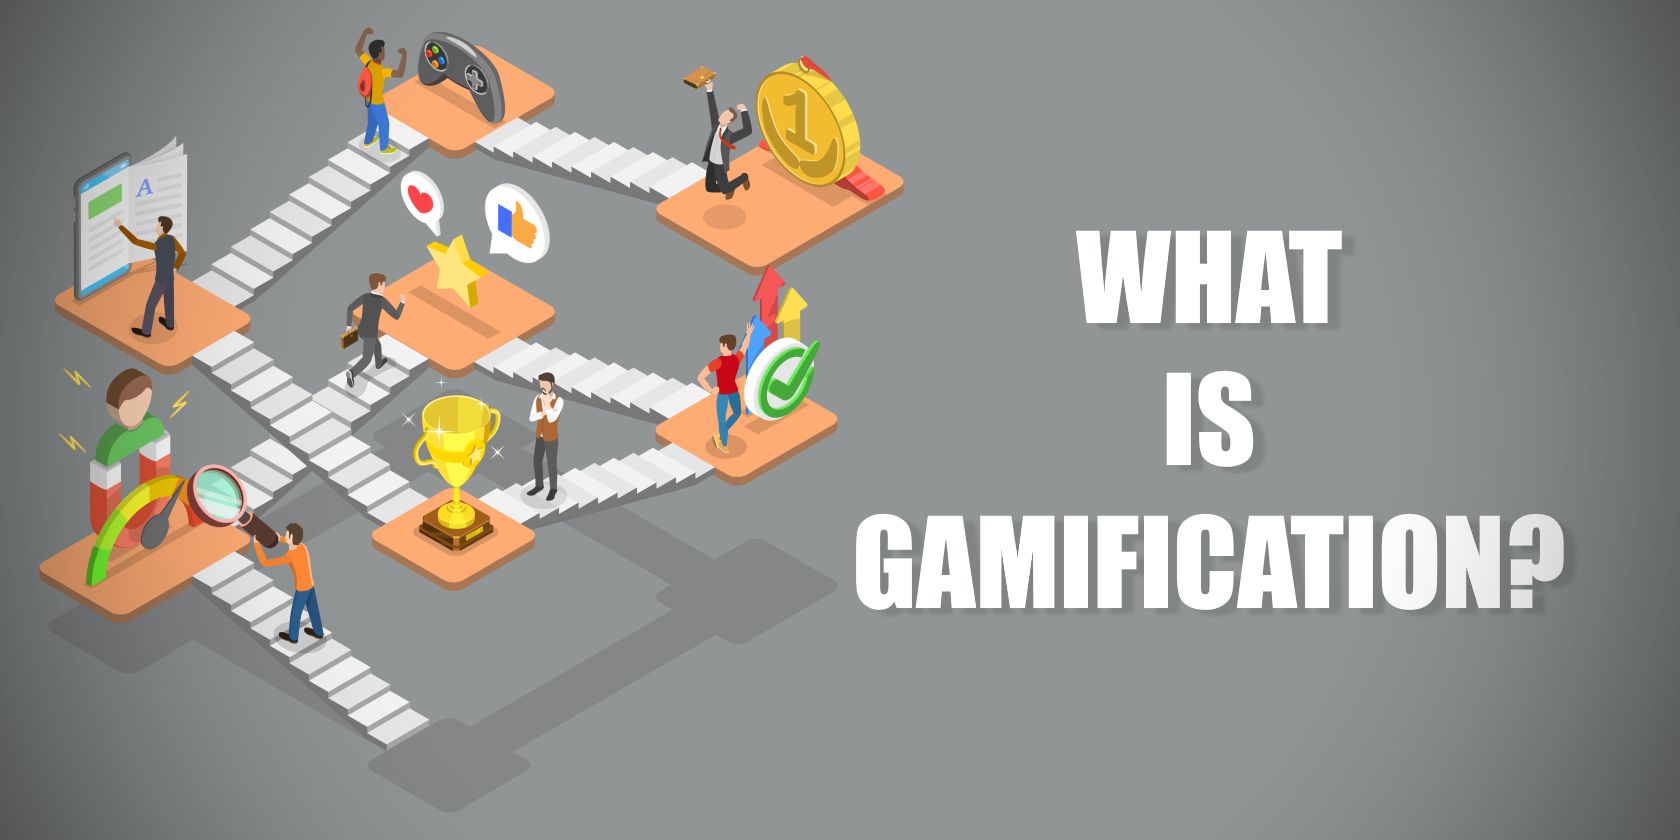 Gamification Of Finance: Trading, Betting, And Gaming